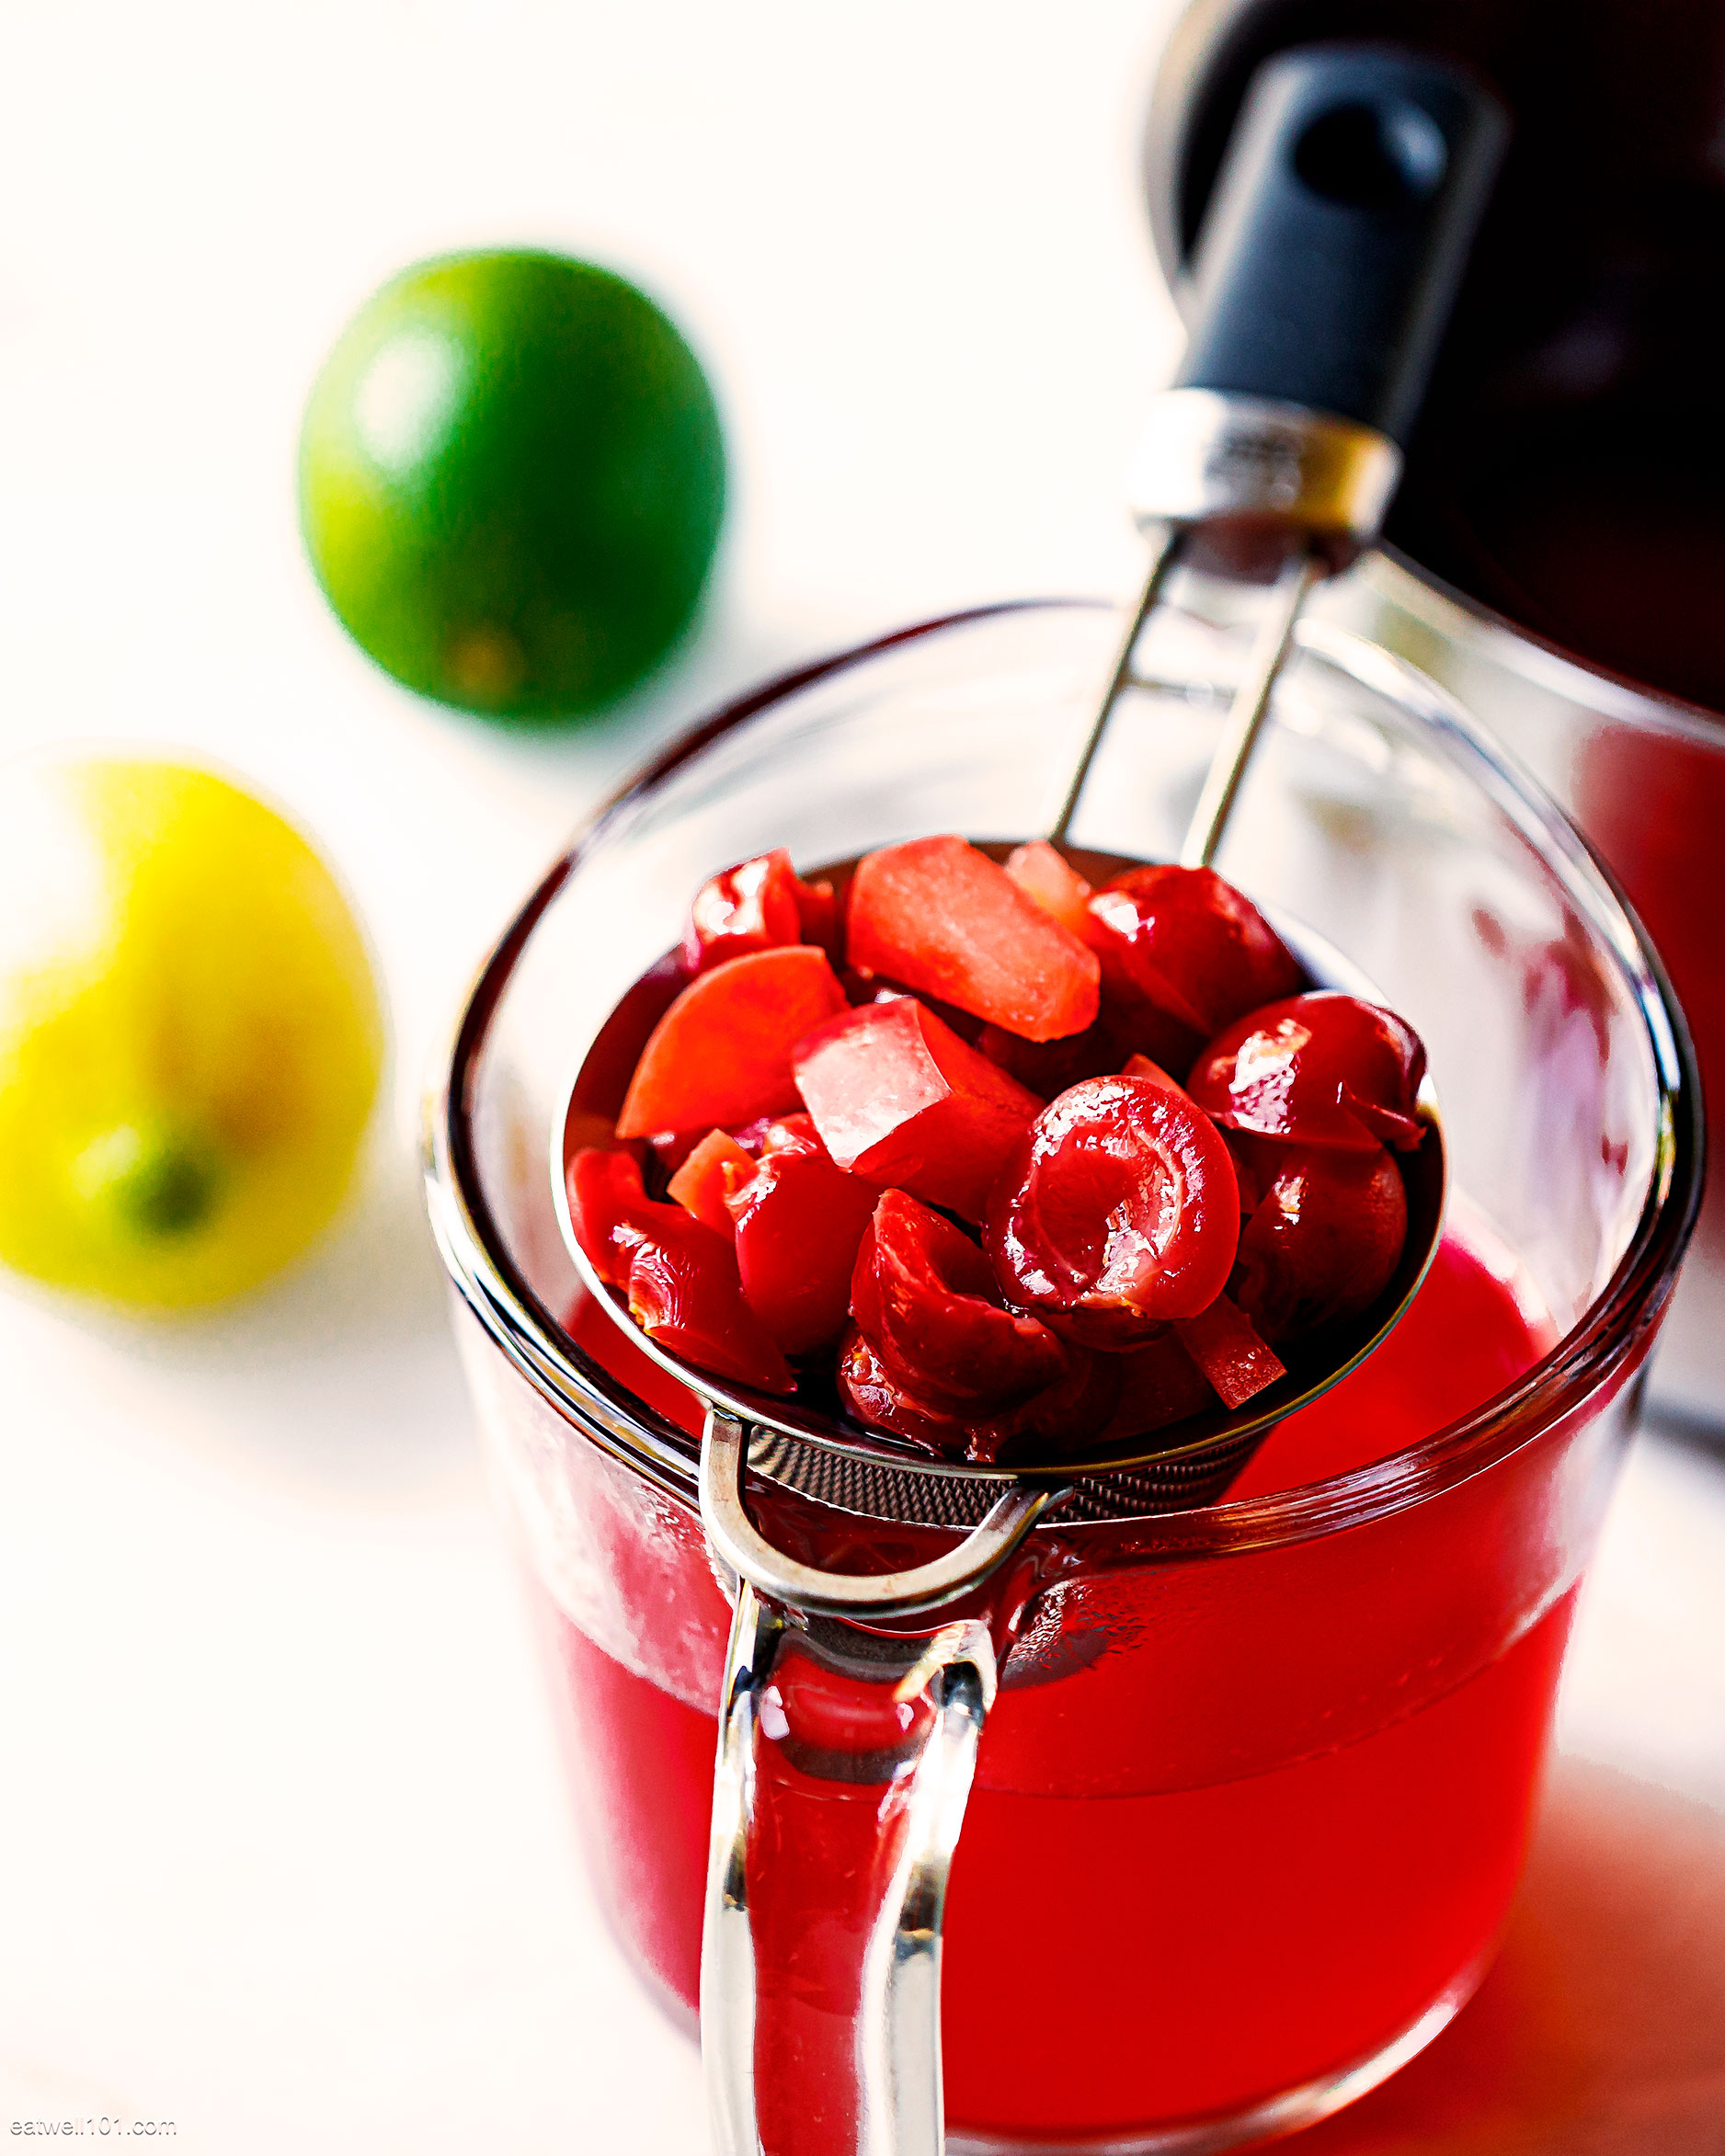 Cherries Syrup